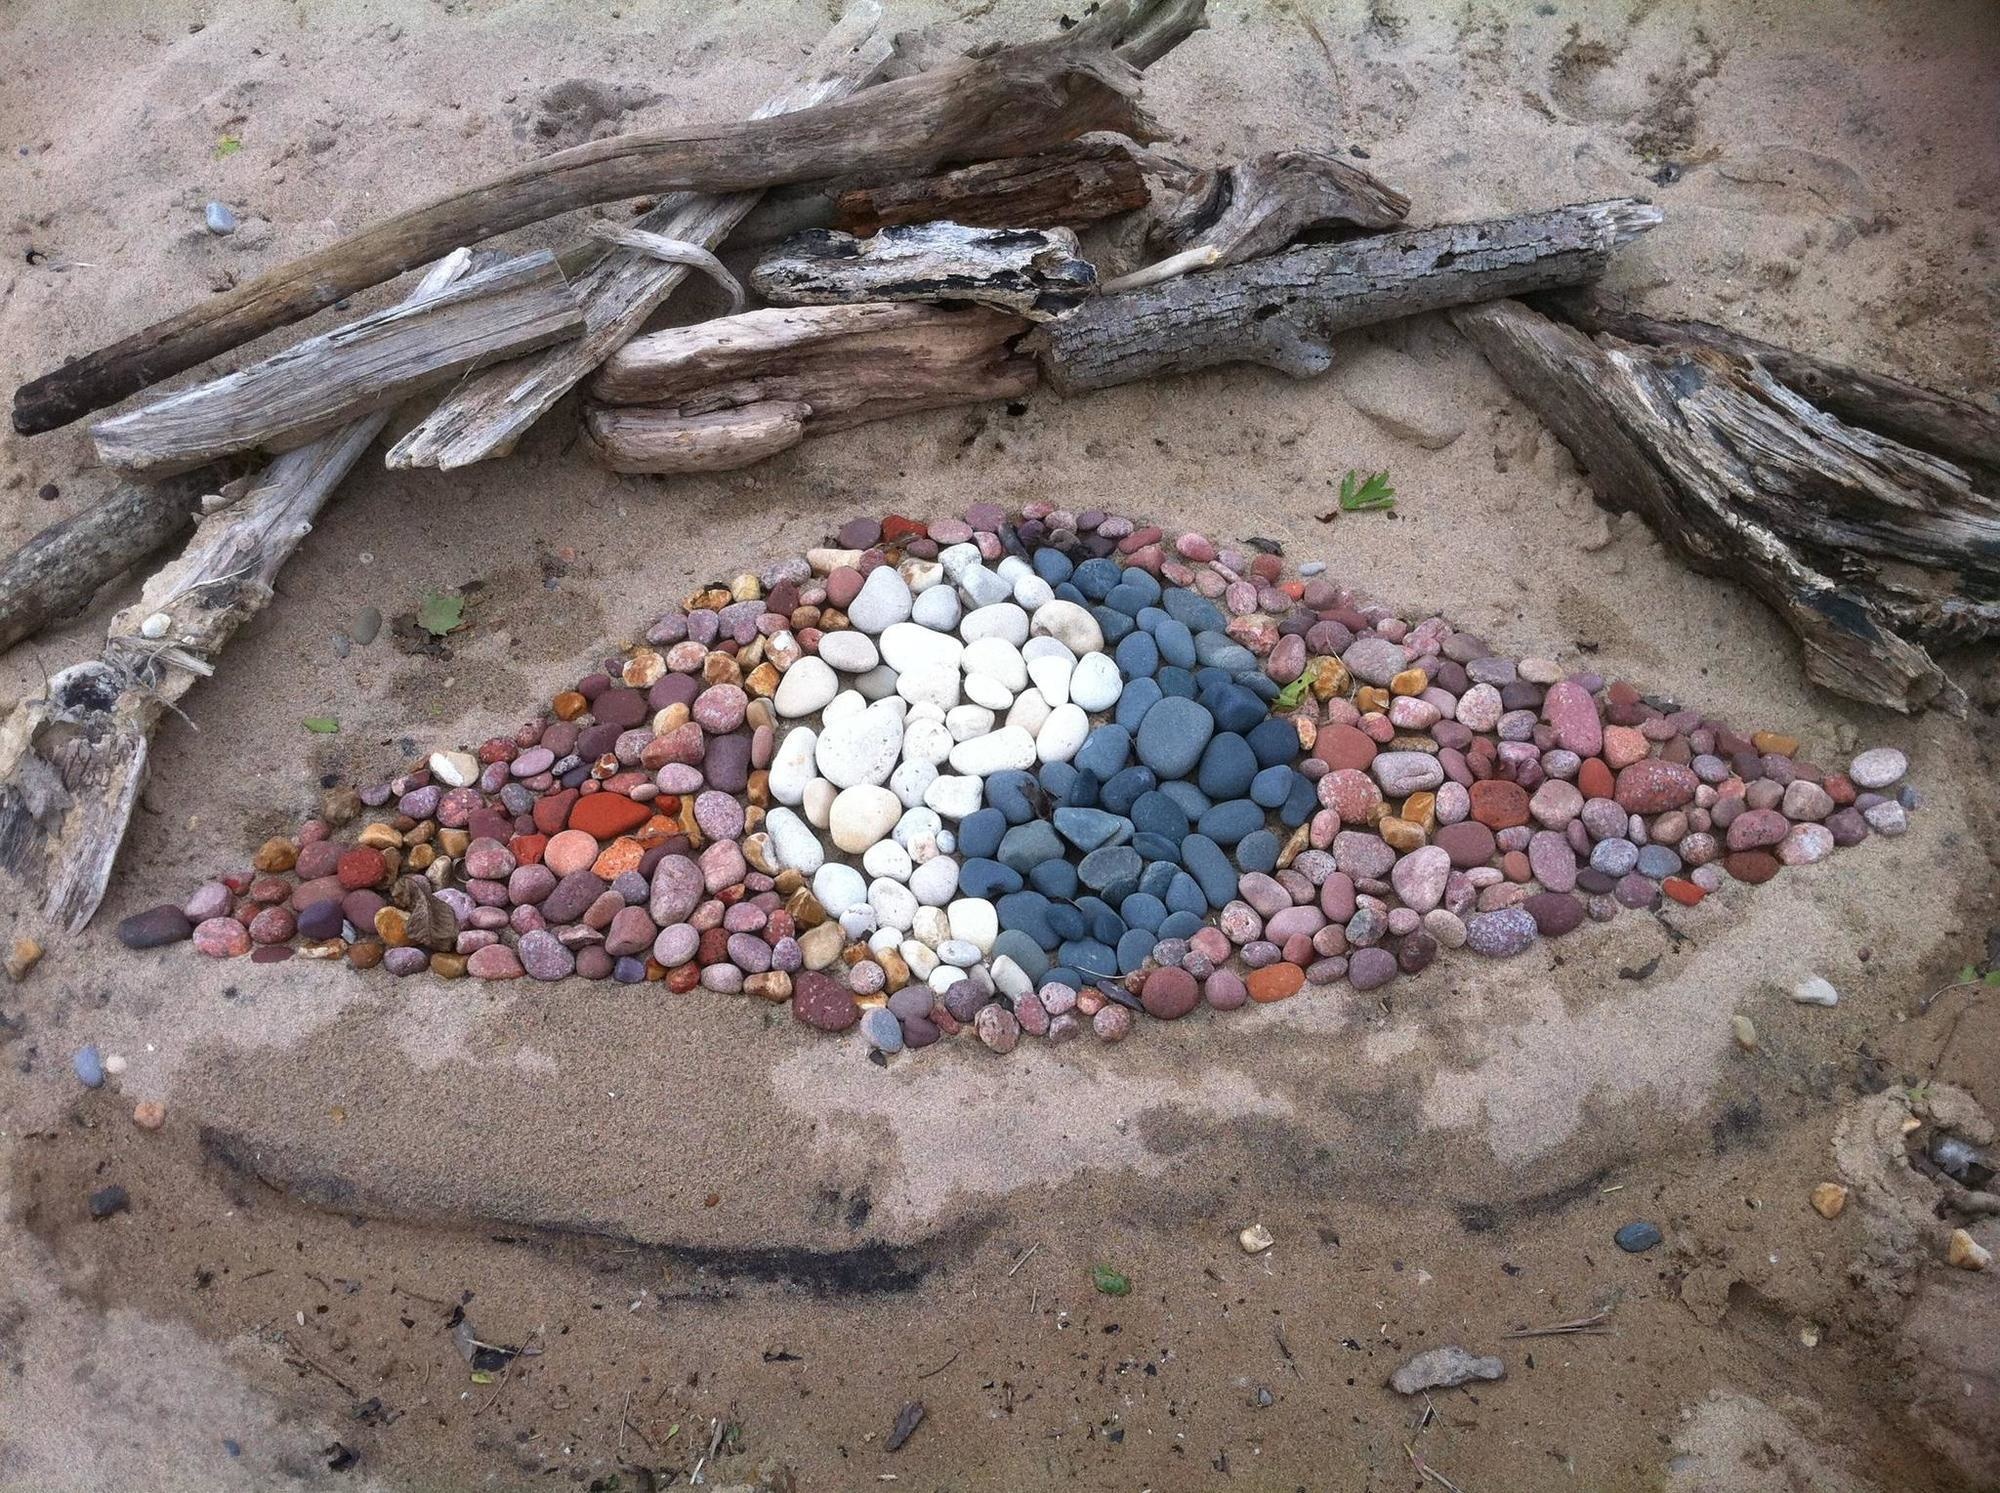 Rock design created by an unknown artist.